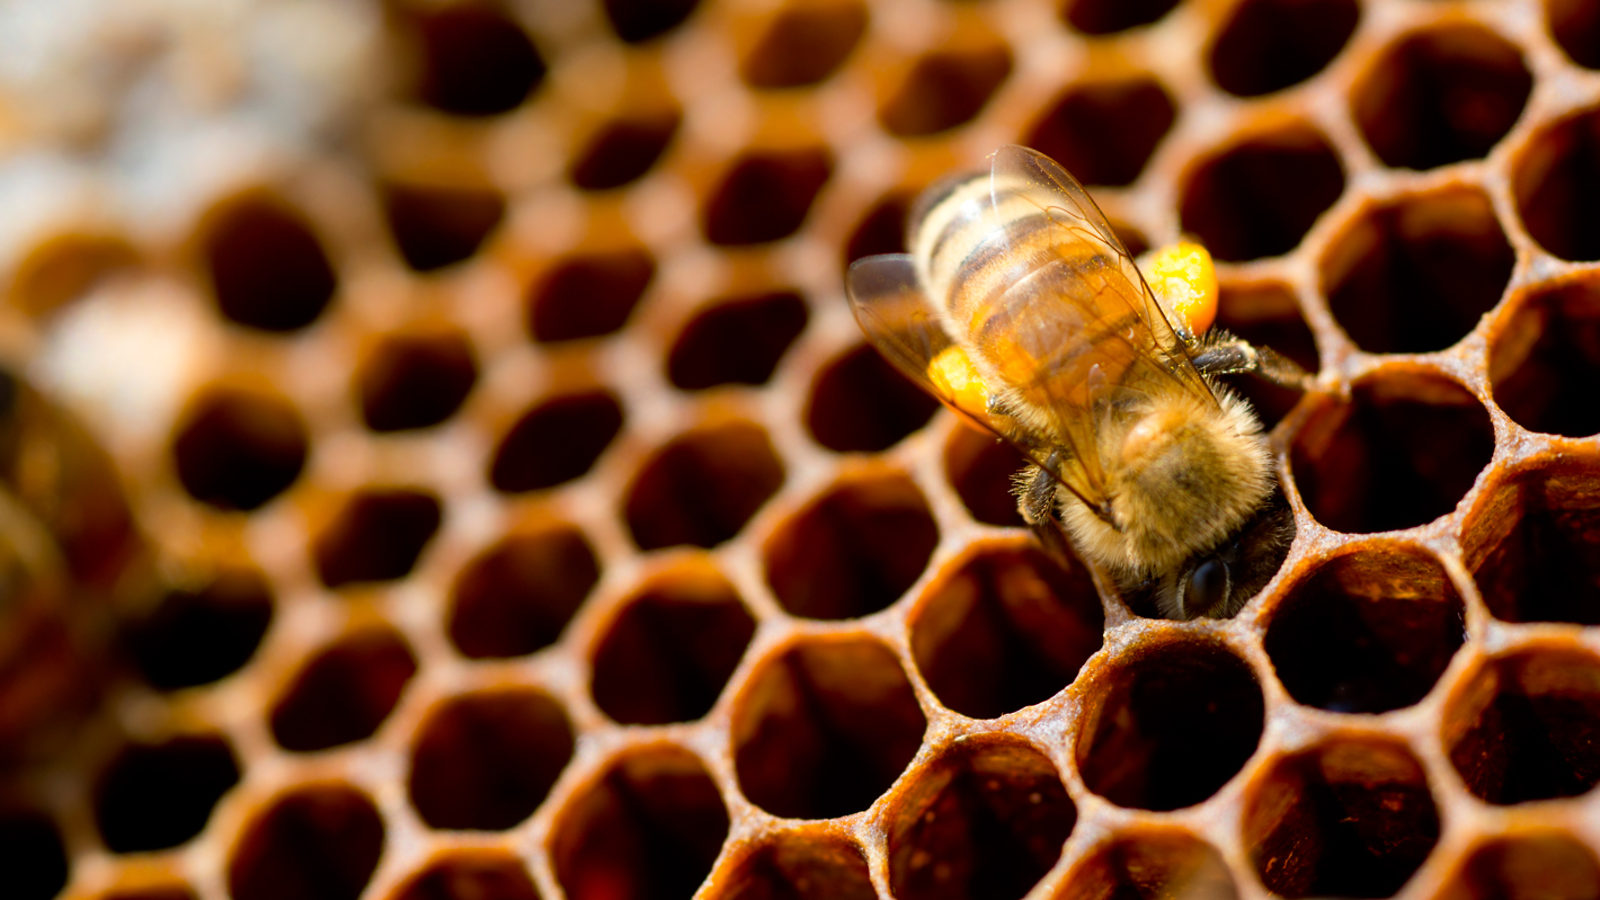 Bees began to die in the hive due to an unknown disease